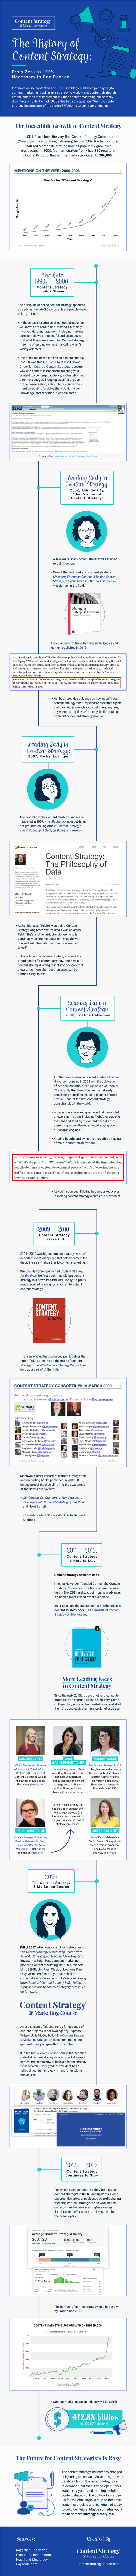 history of content strategy infographic